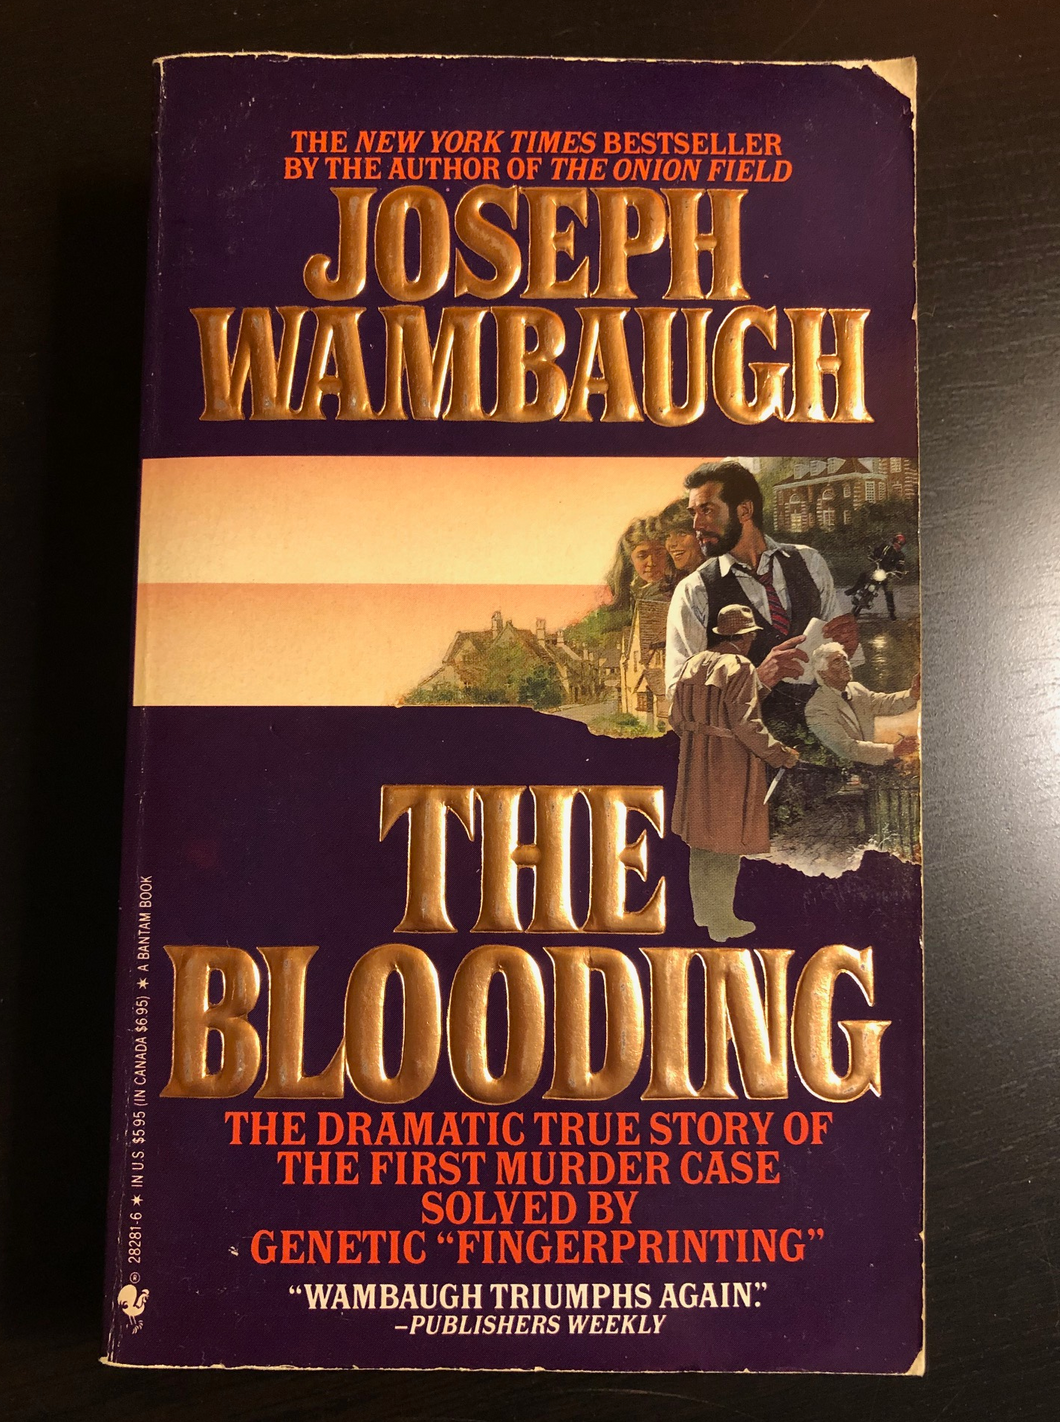 The Blooding: The Dramatic True Story of the First Murder Case Solved by 